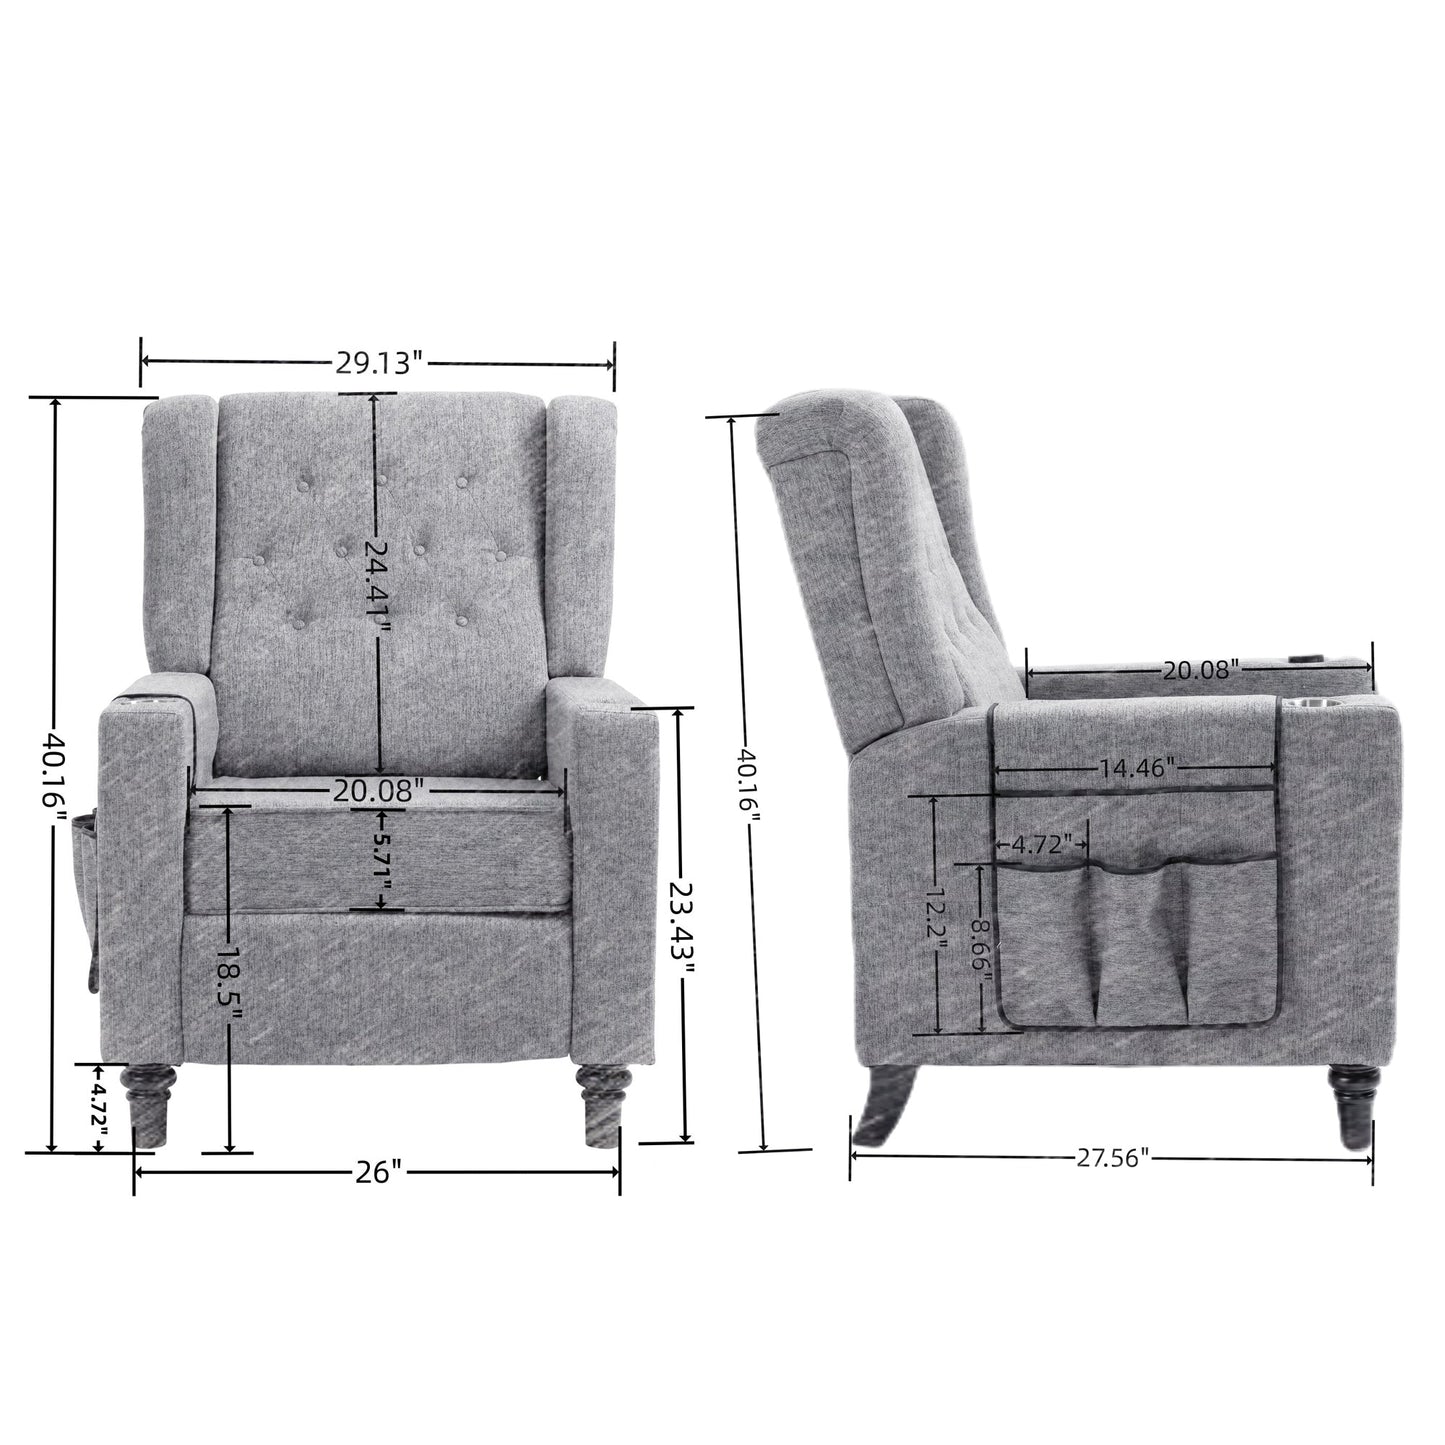 Arm Pushing Recliner Chair, Modern Button Tufted Wingback Push Back Recliner Chair, Living Room Chair Fabric Pushback Manual Single Reclining Sofa Home Theater Seating for Bedroom,Light Gray